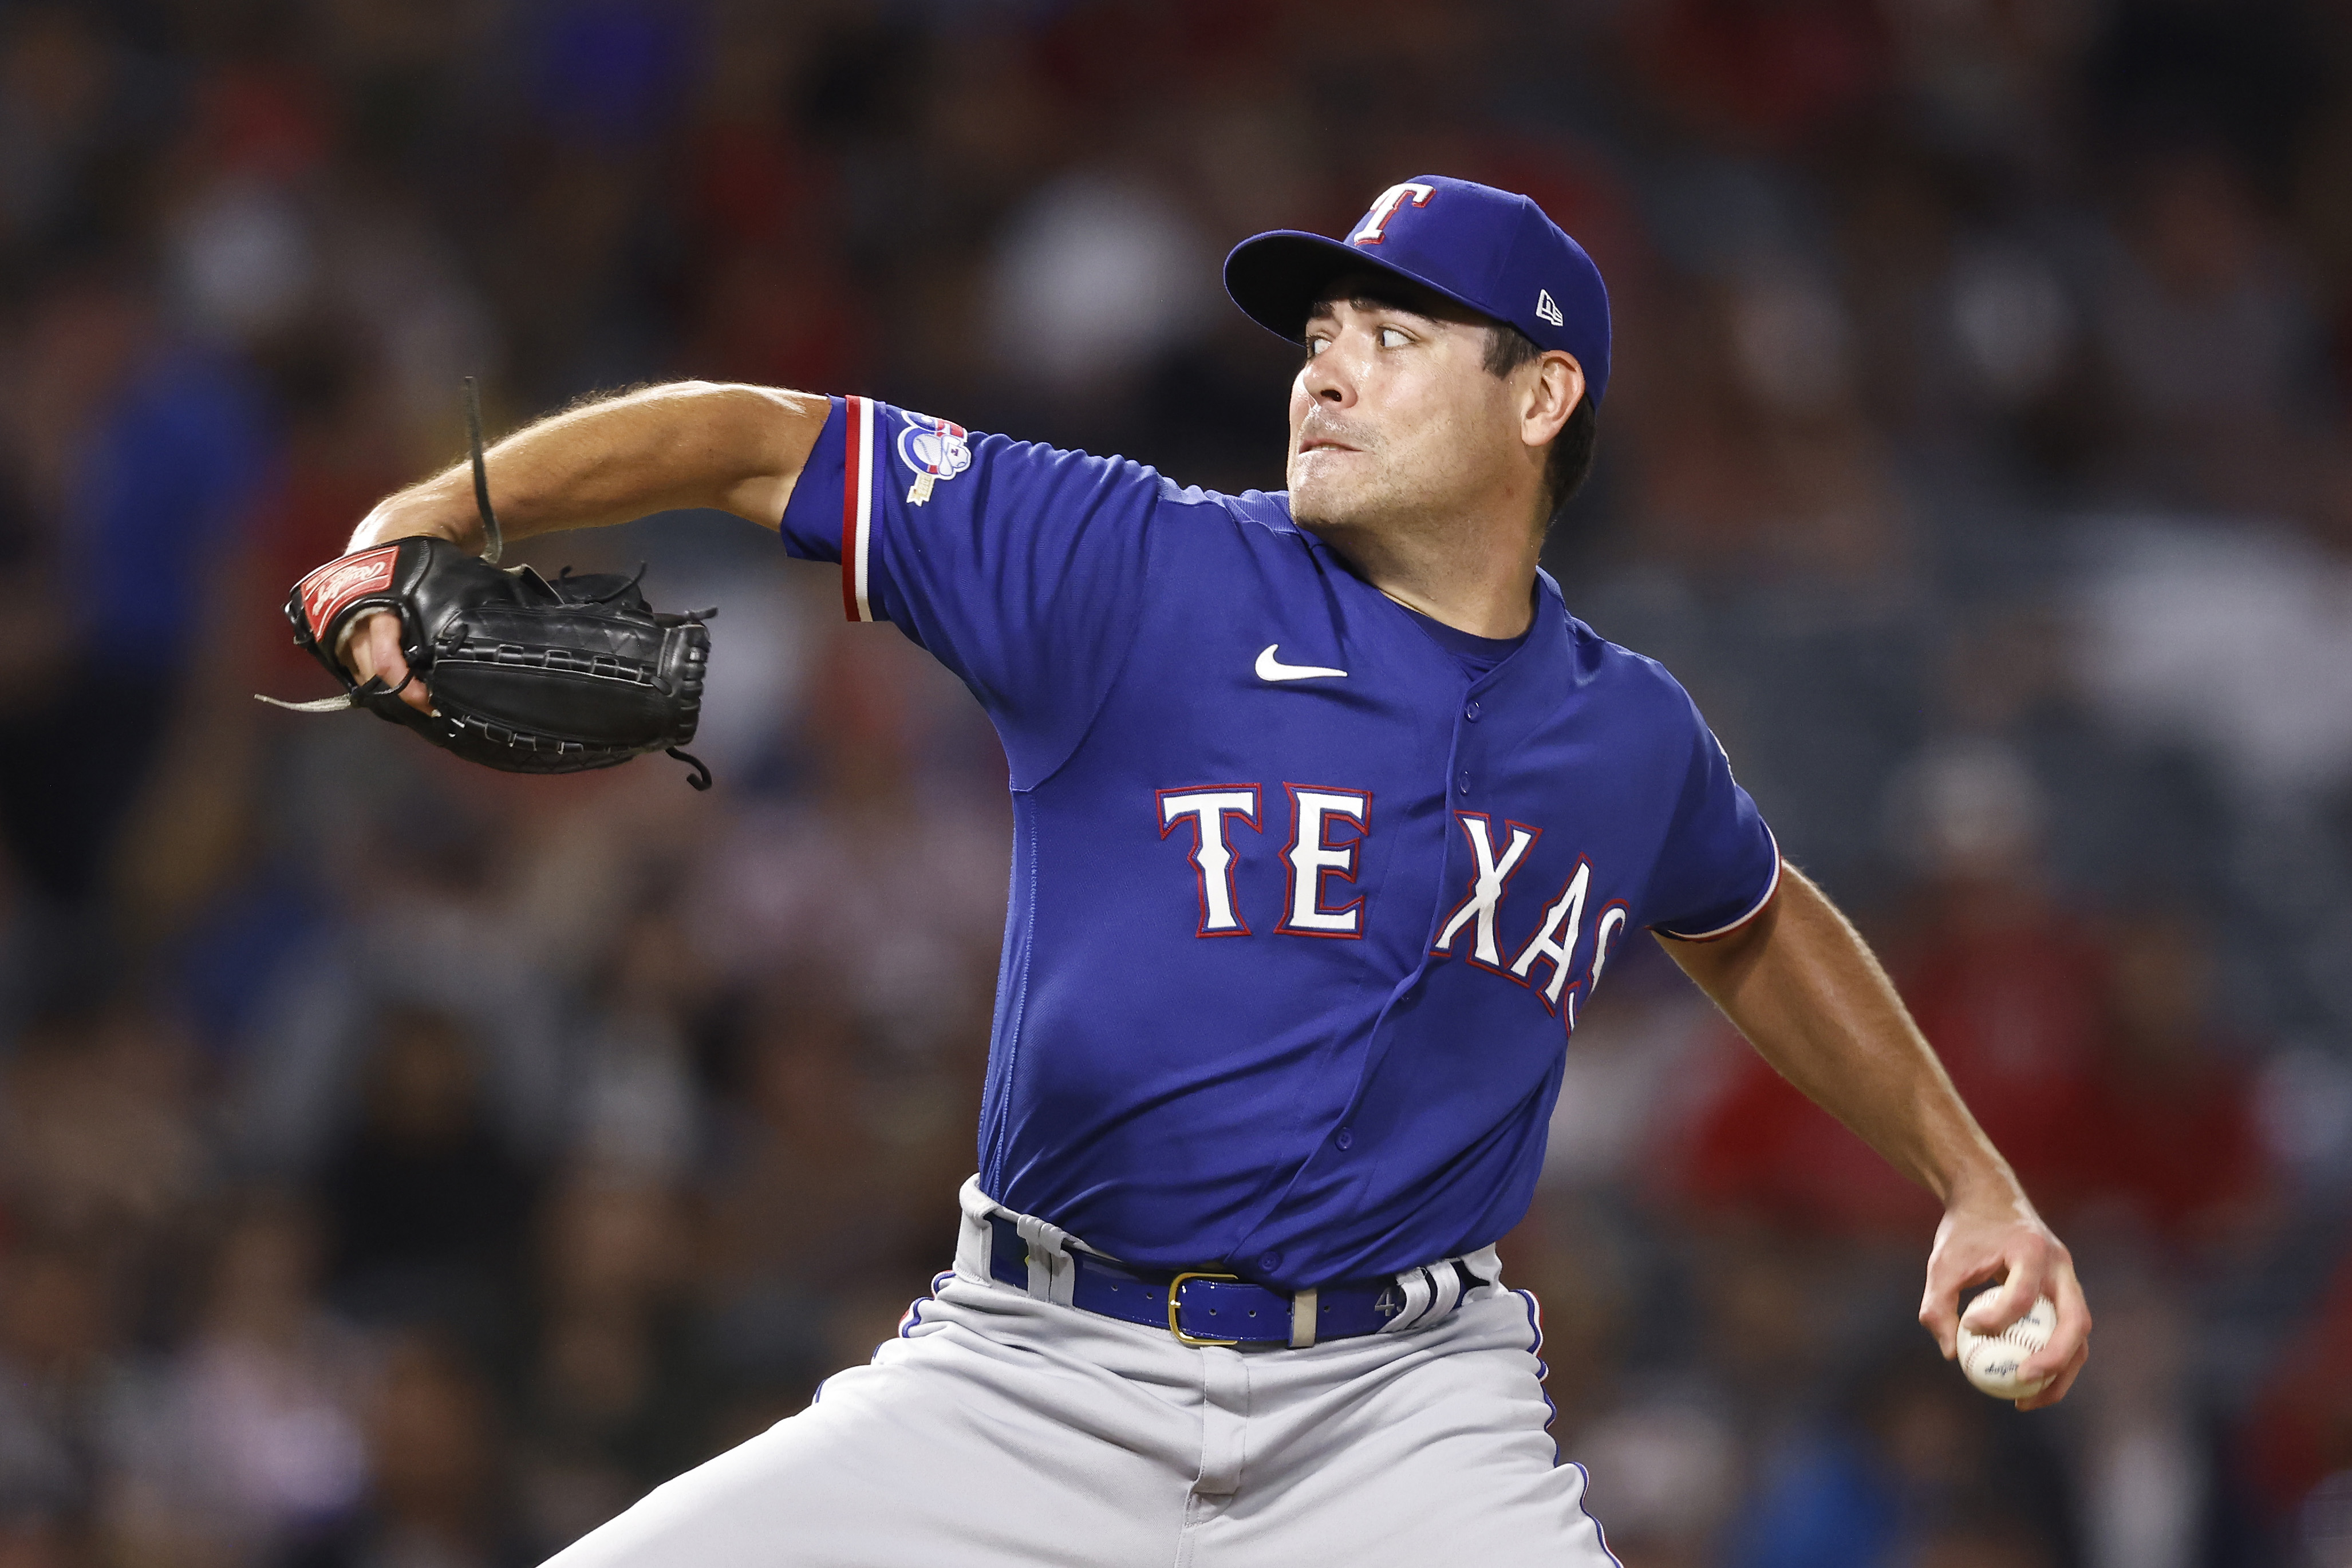 Texas Rangers recover to grab finale with win over Los Angeles